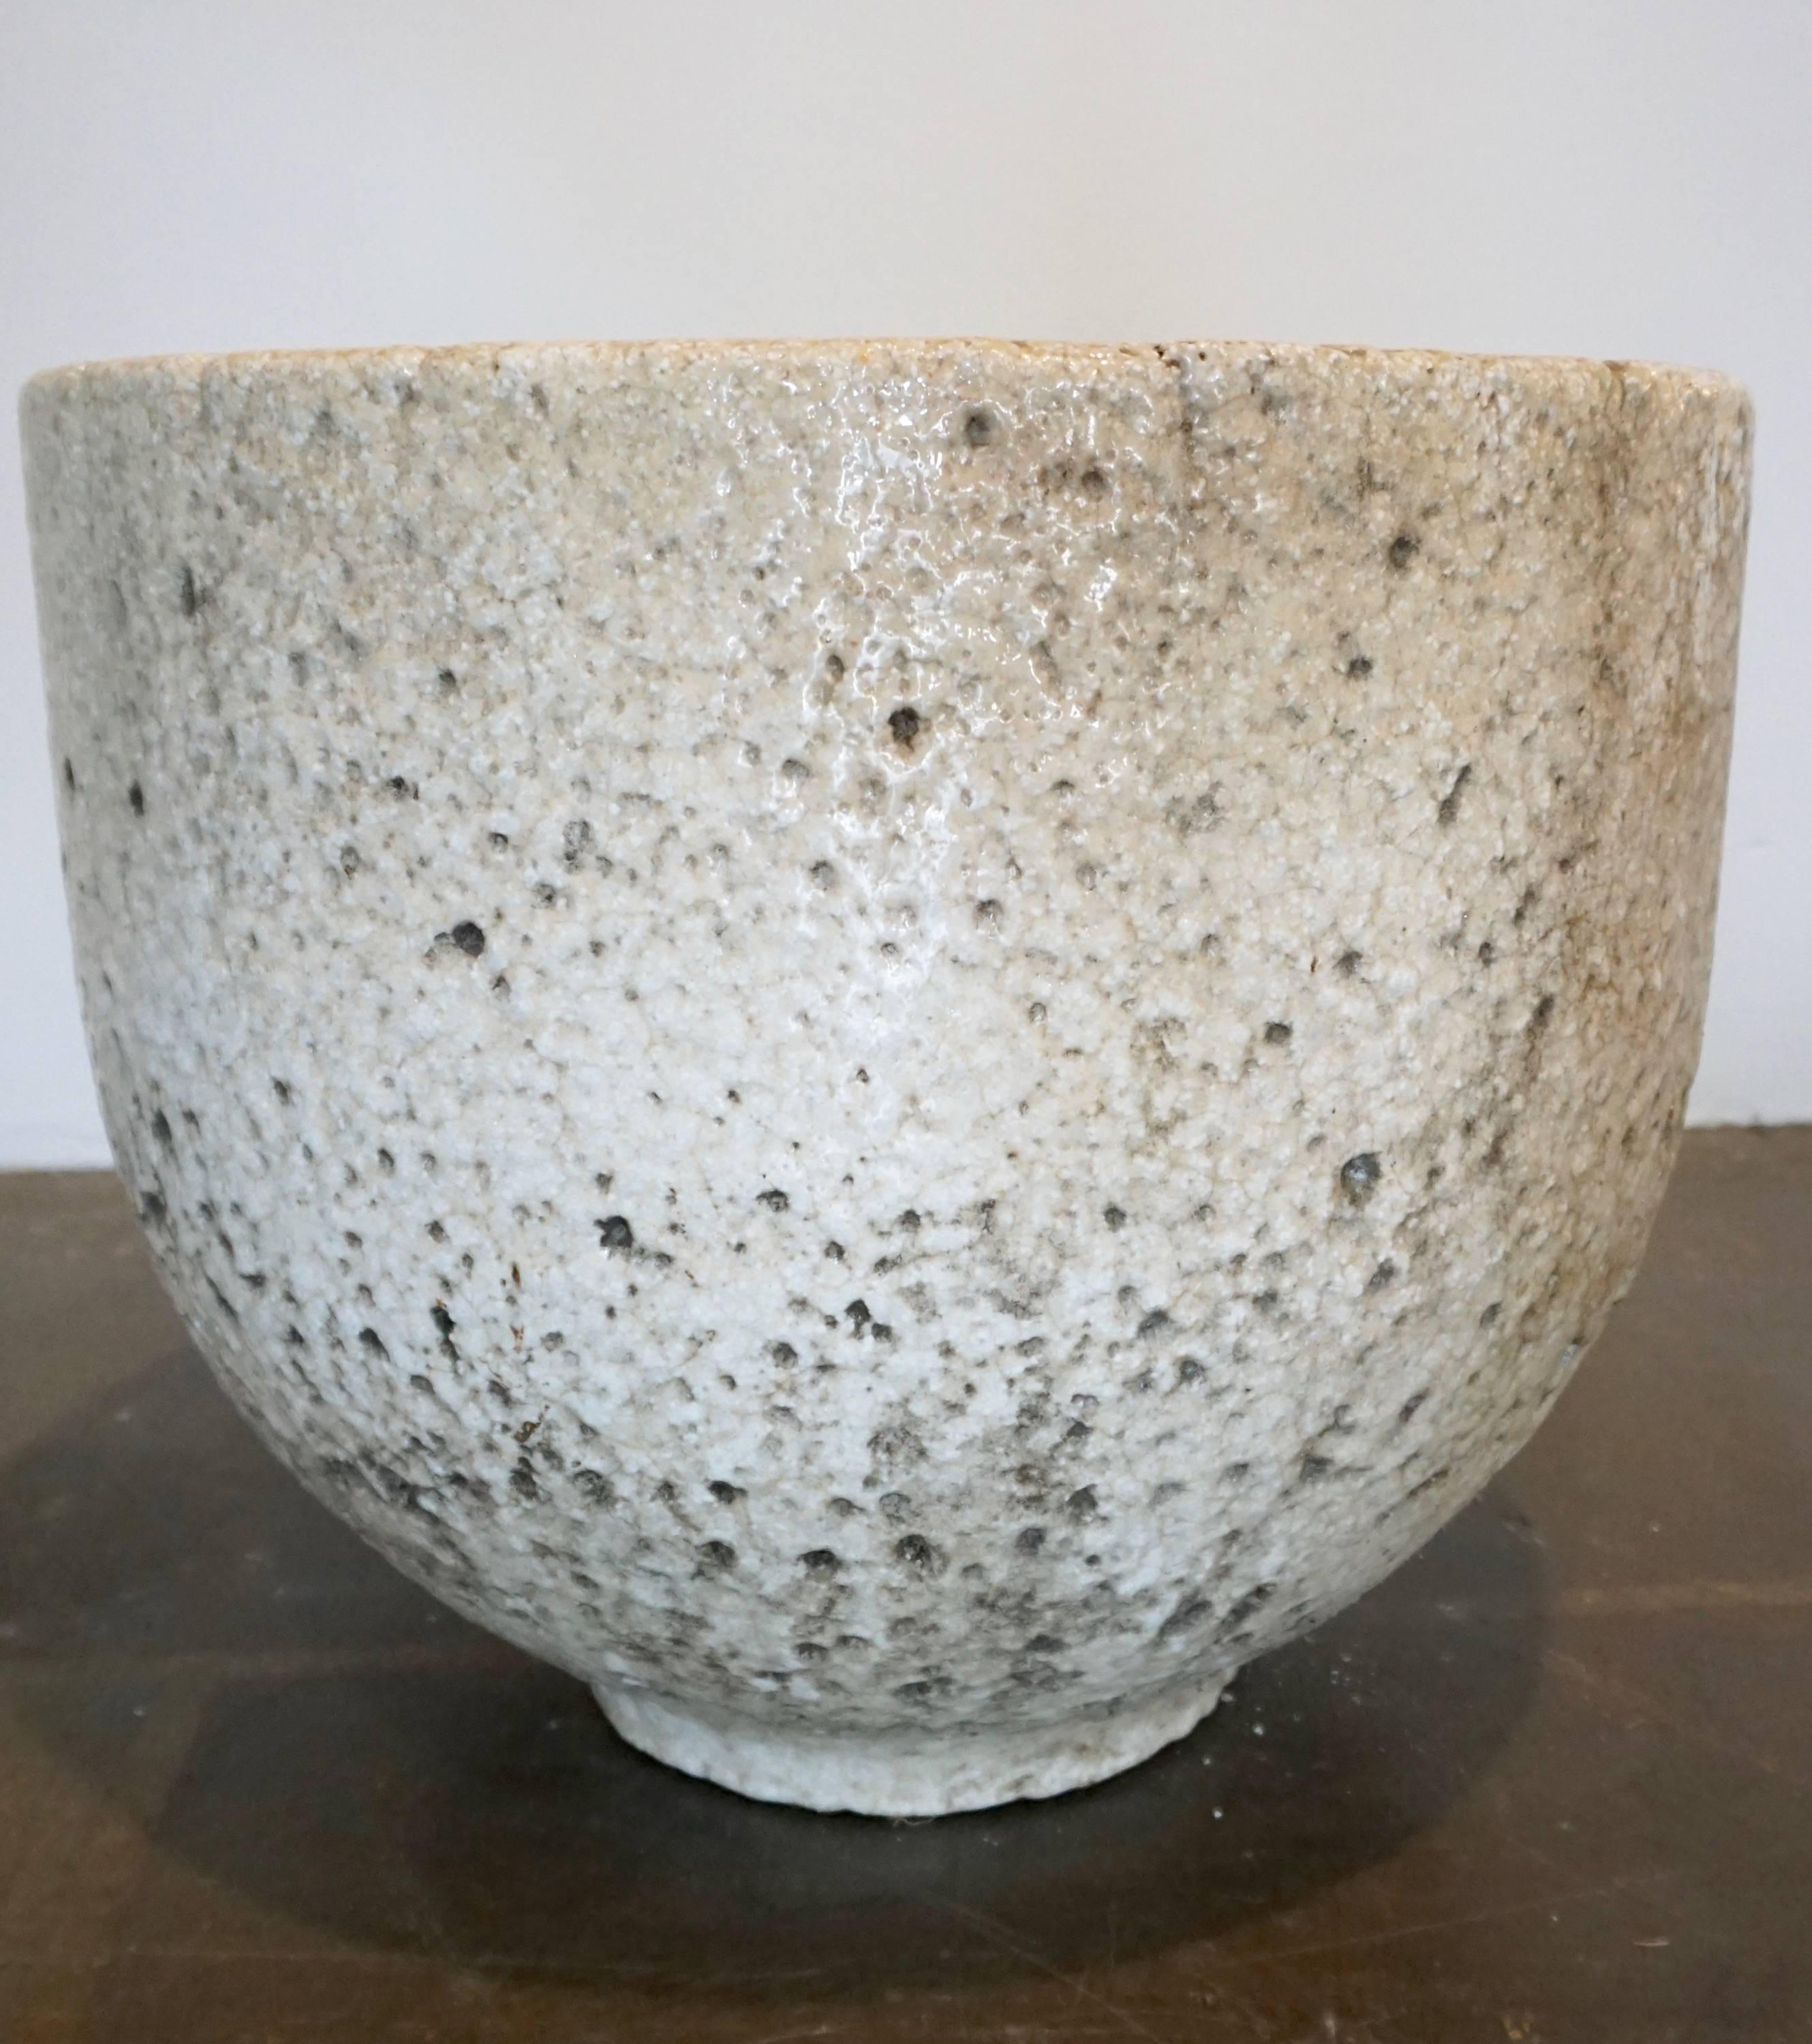 Ceramic vessel used to melt glass at very high temperatures. Remnants of melted green glass remain at the bottom of the vessel as well as staining of the vessel from the glass,enhancing its beauty. Can be used as a planter or a decorative object,